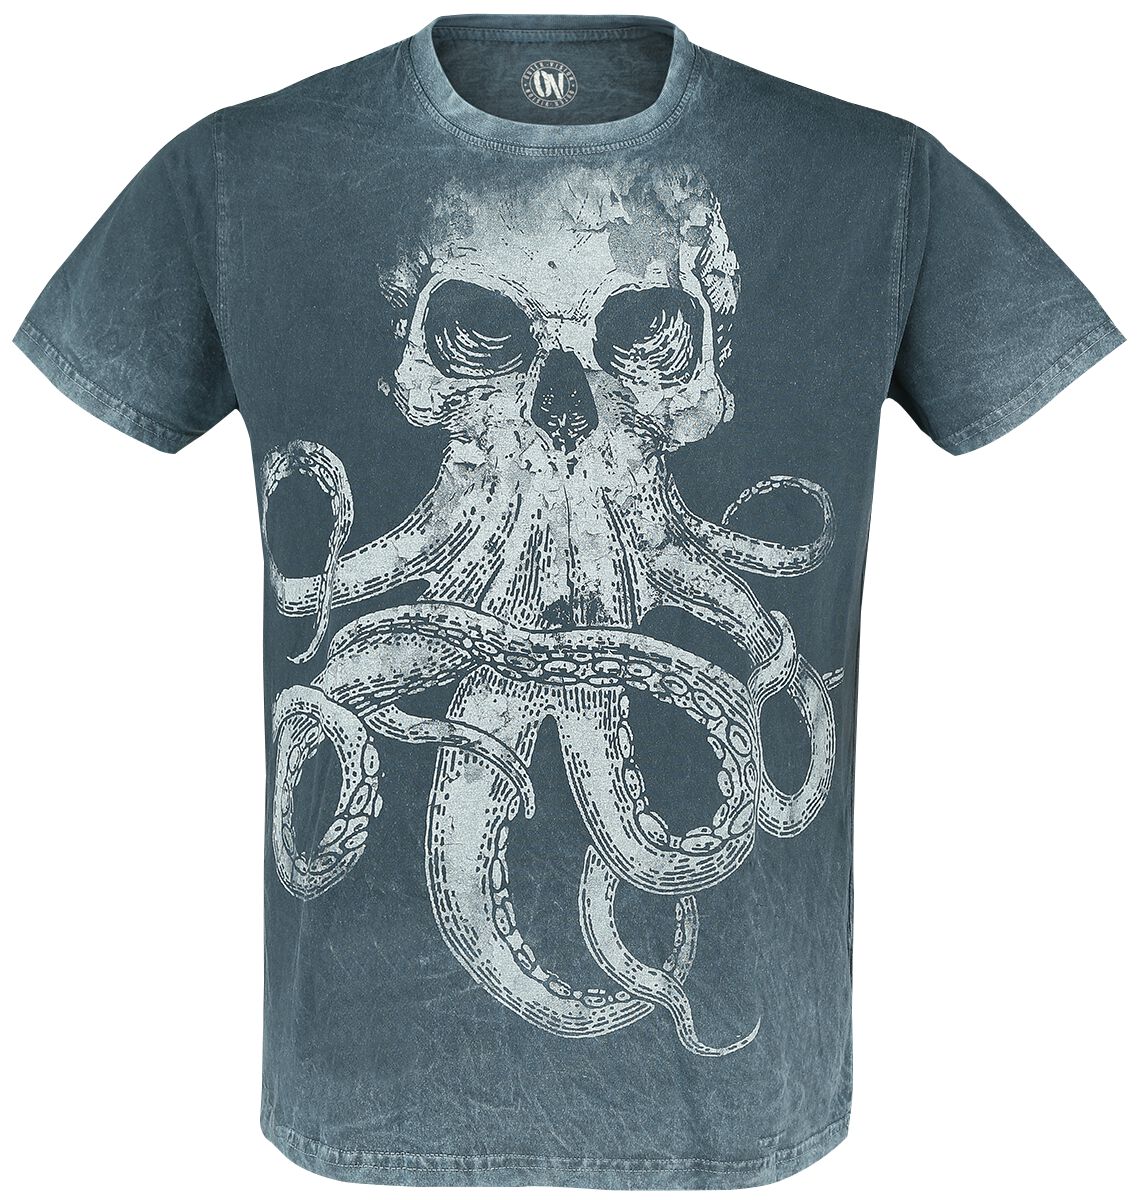 Outer Vision Dead Sea T-Shirt türkis in M von Outer Vision